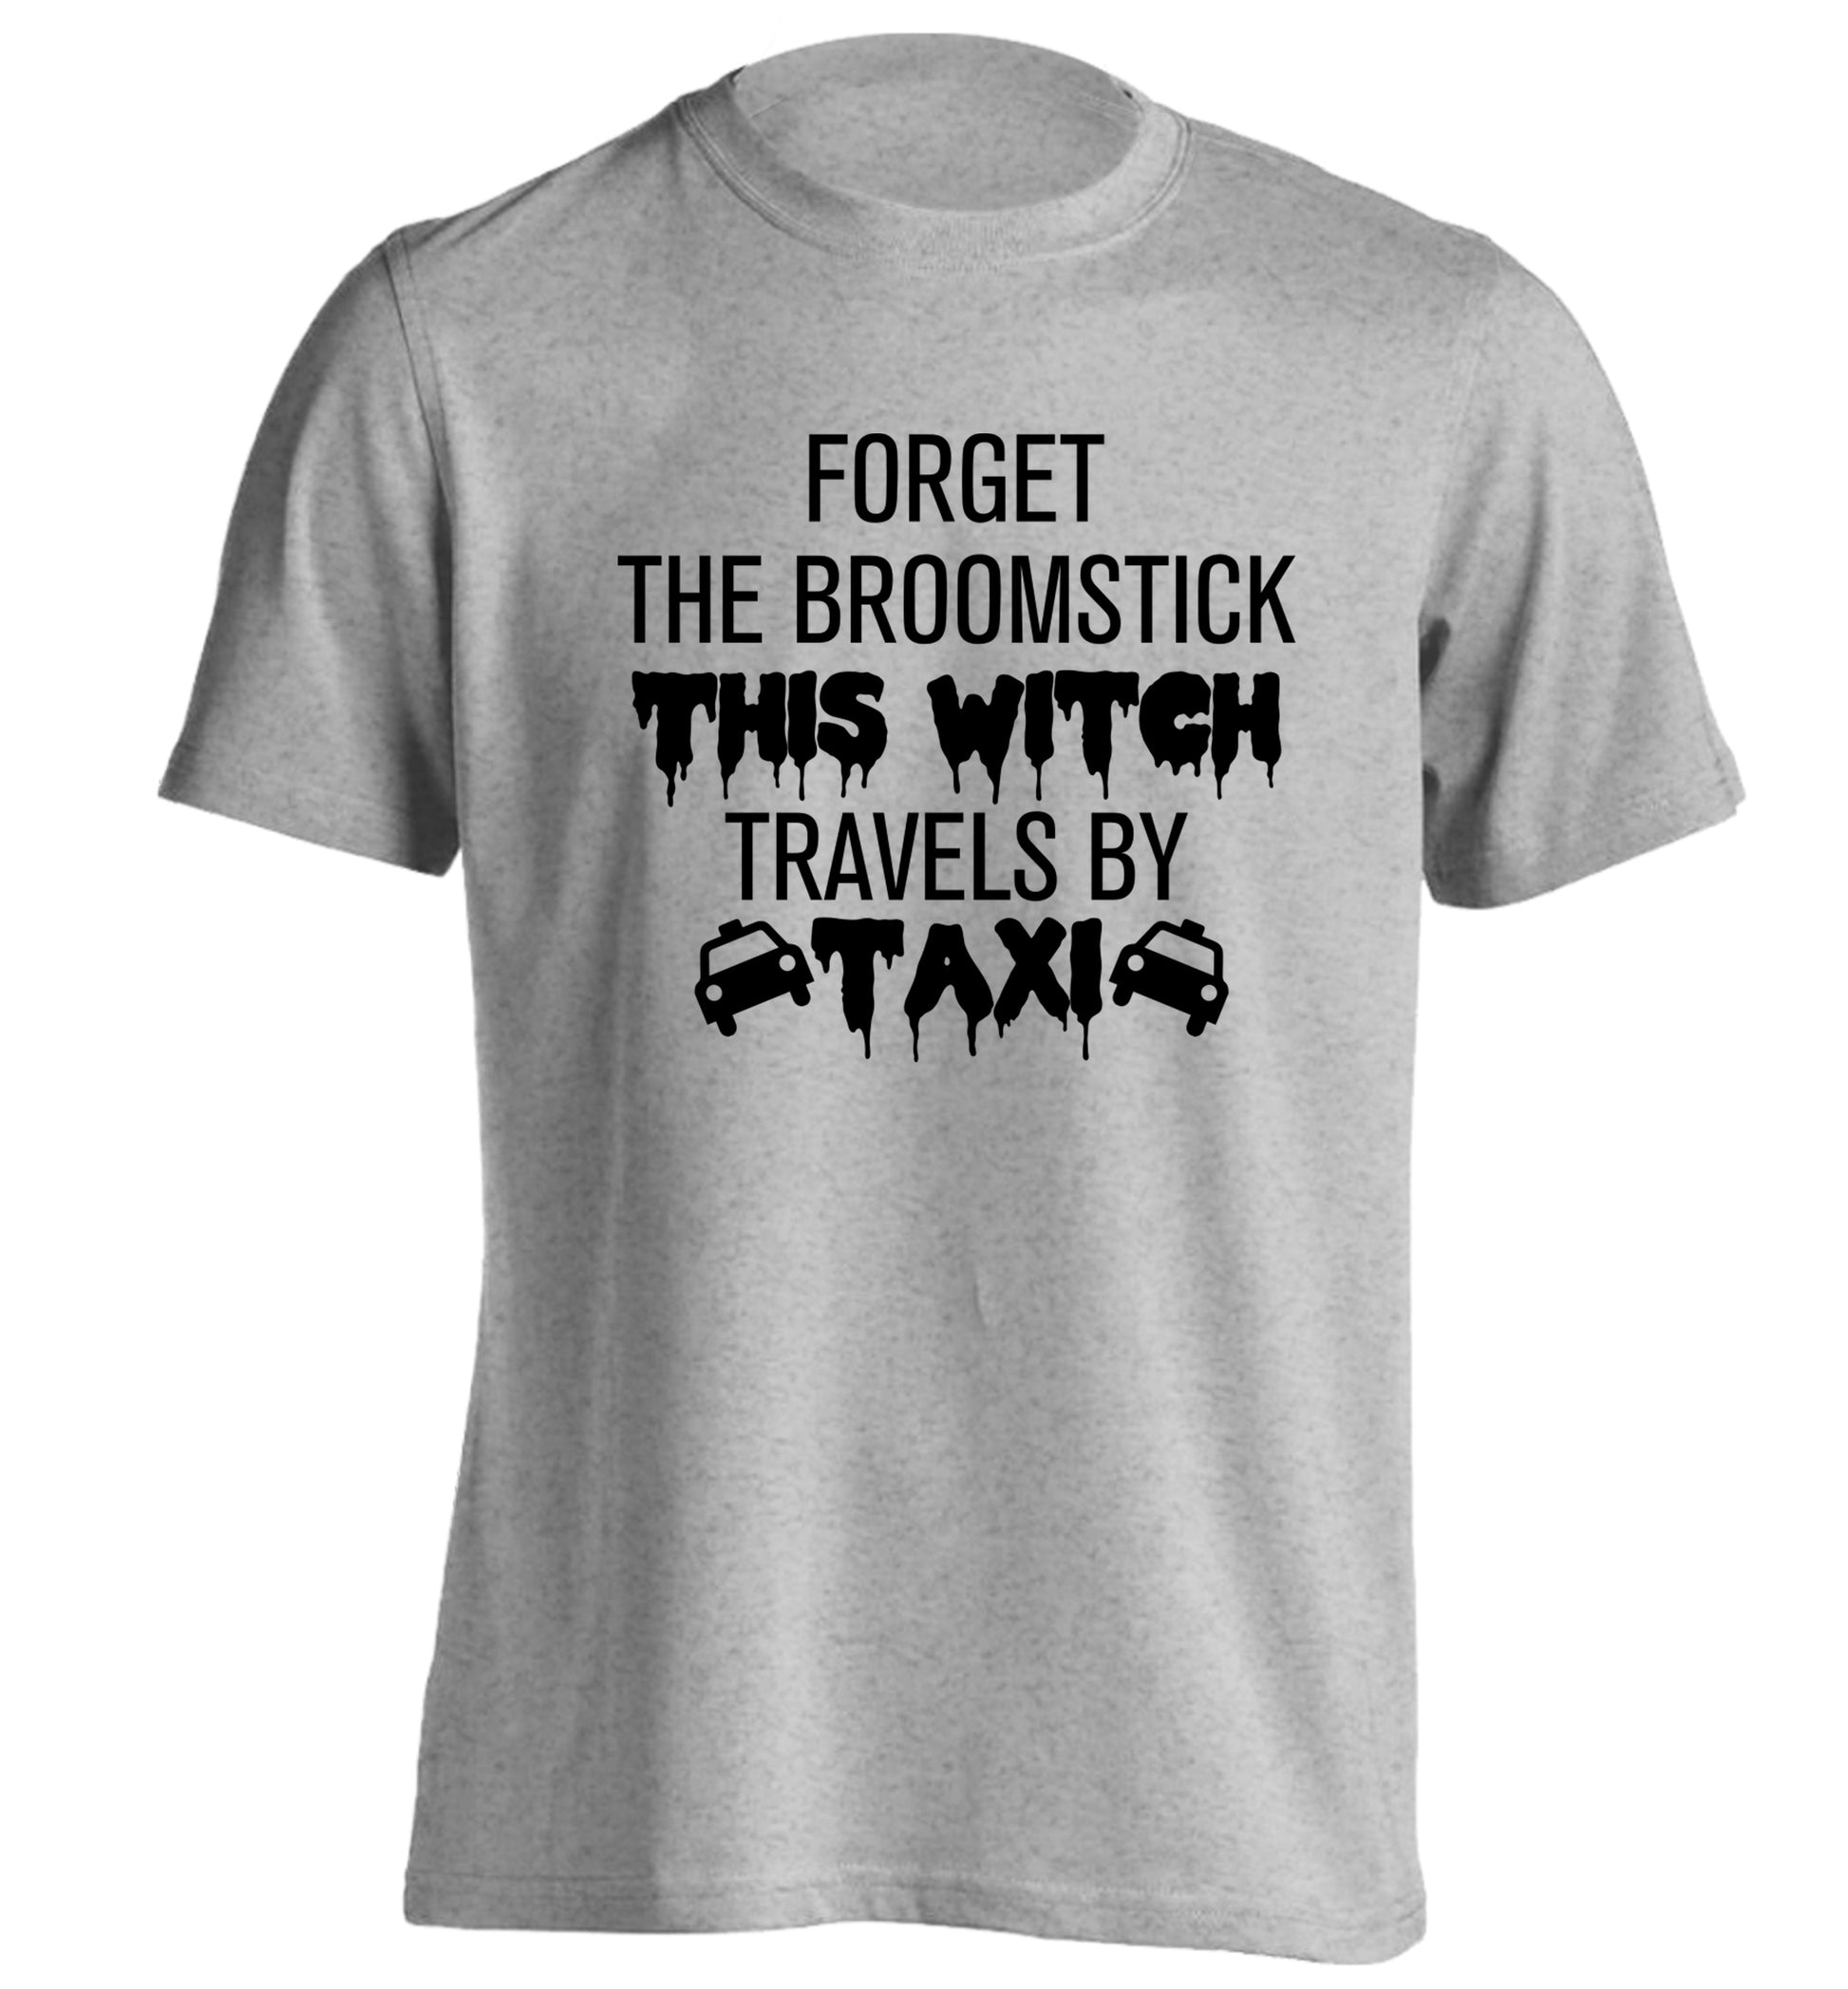 Forget the broomstick this witch travels by taxi adults unisexgrey Tshirt 2XL